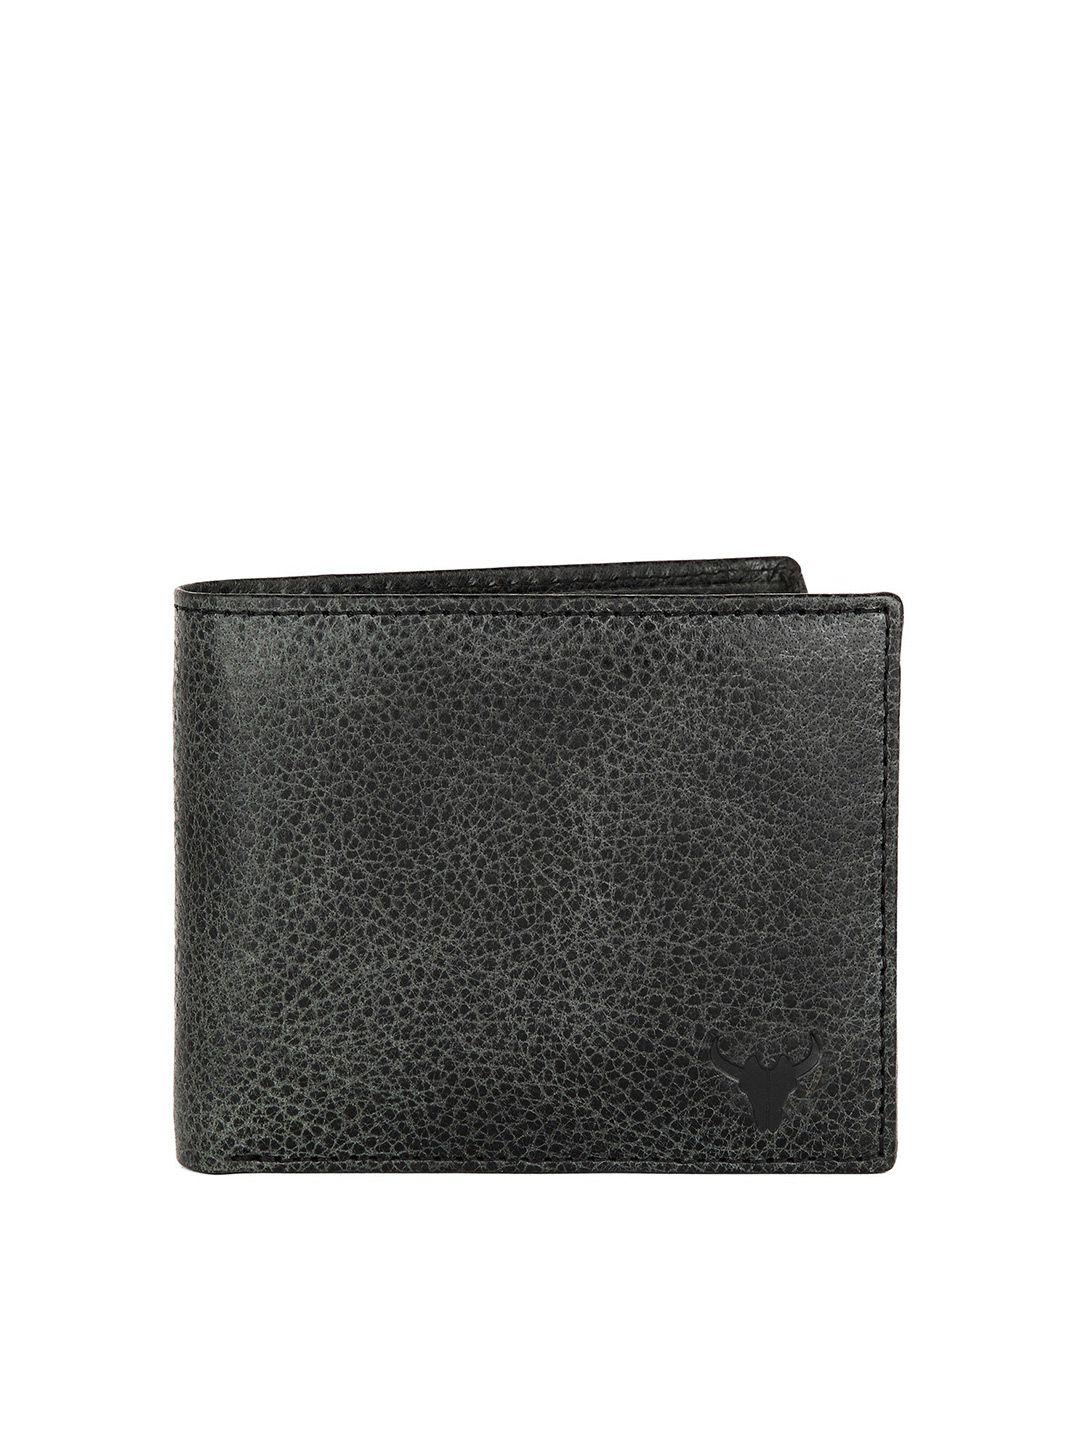 napa hide men black textured leather two fold wallet with rfid